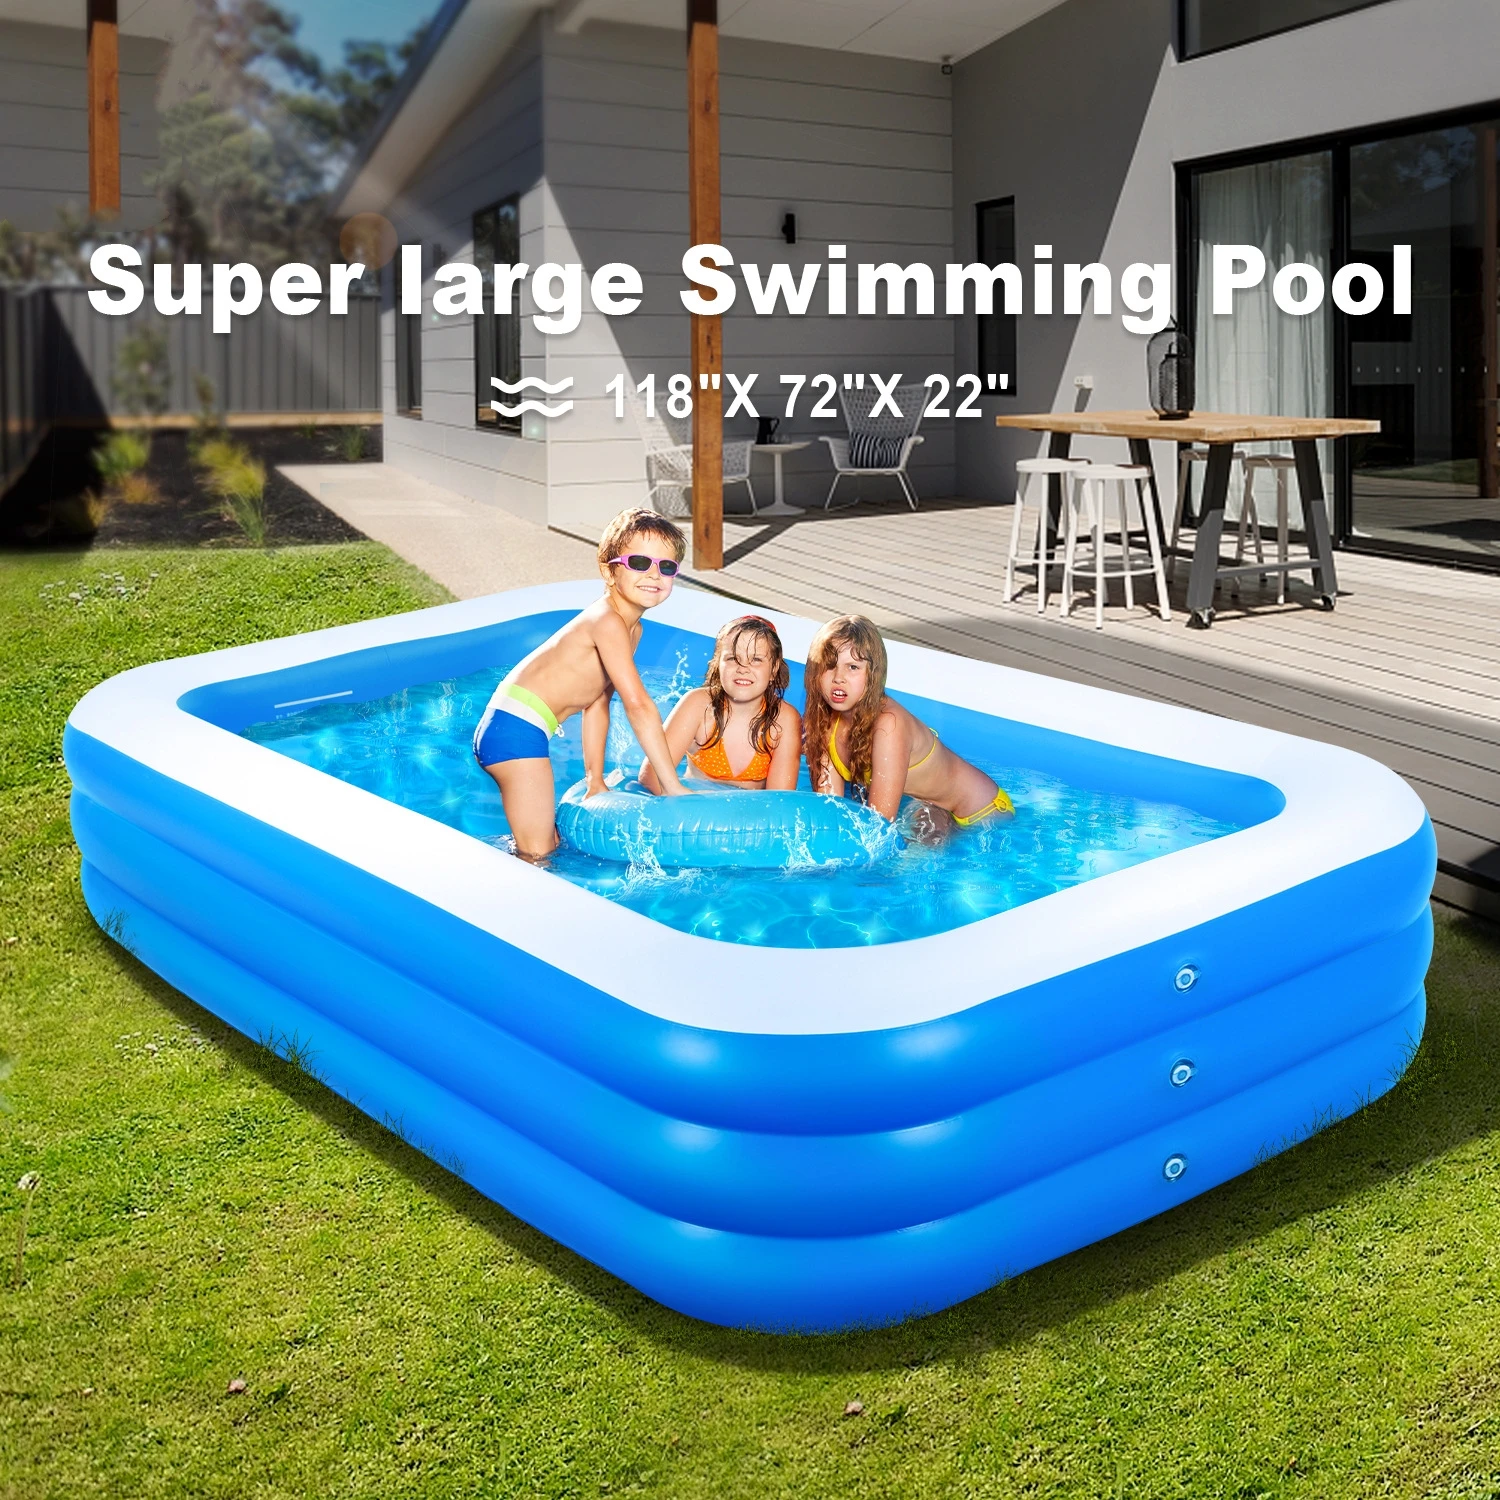 Inflatable Swimming Pool Children's Adult PVC Large Family Party Pools Outdoor Thickened Summer Baby Play Pool Toys Gift folding bathtub adult household bath tub large inflatable tub bath tub family sitting bath tub